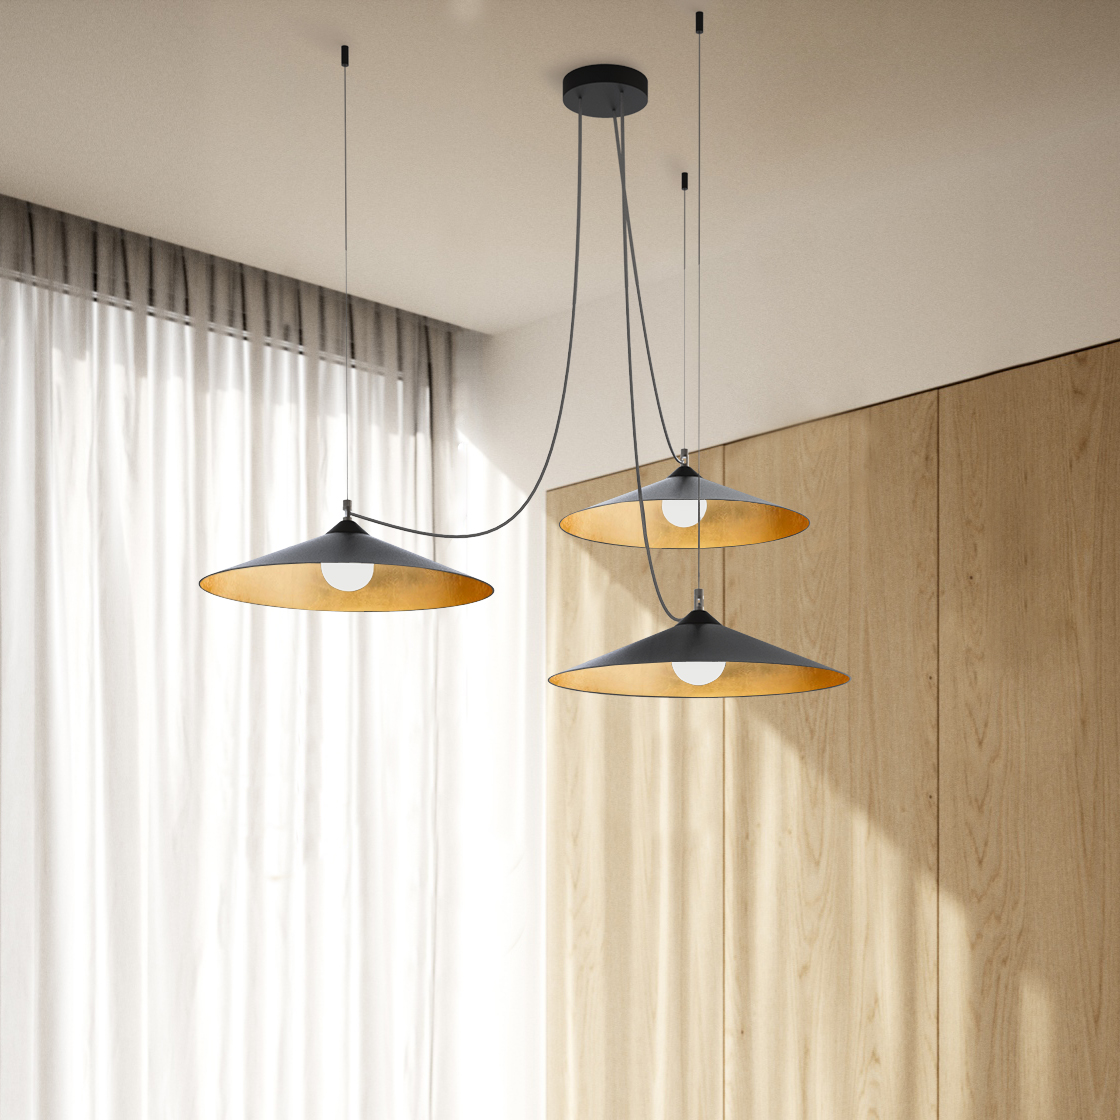 COLOMBO SUSPENSION WITH 3 LIGHT DIFFUSERS